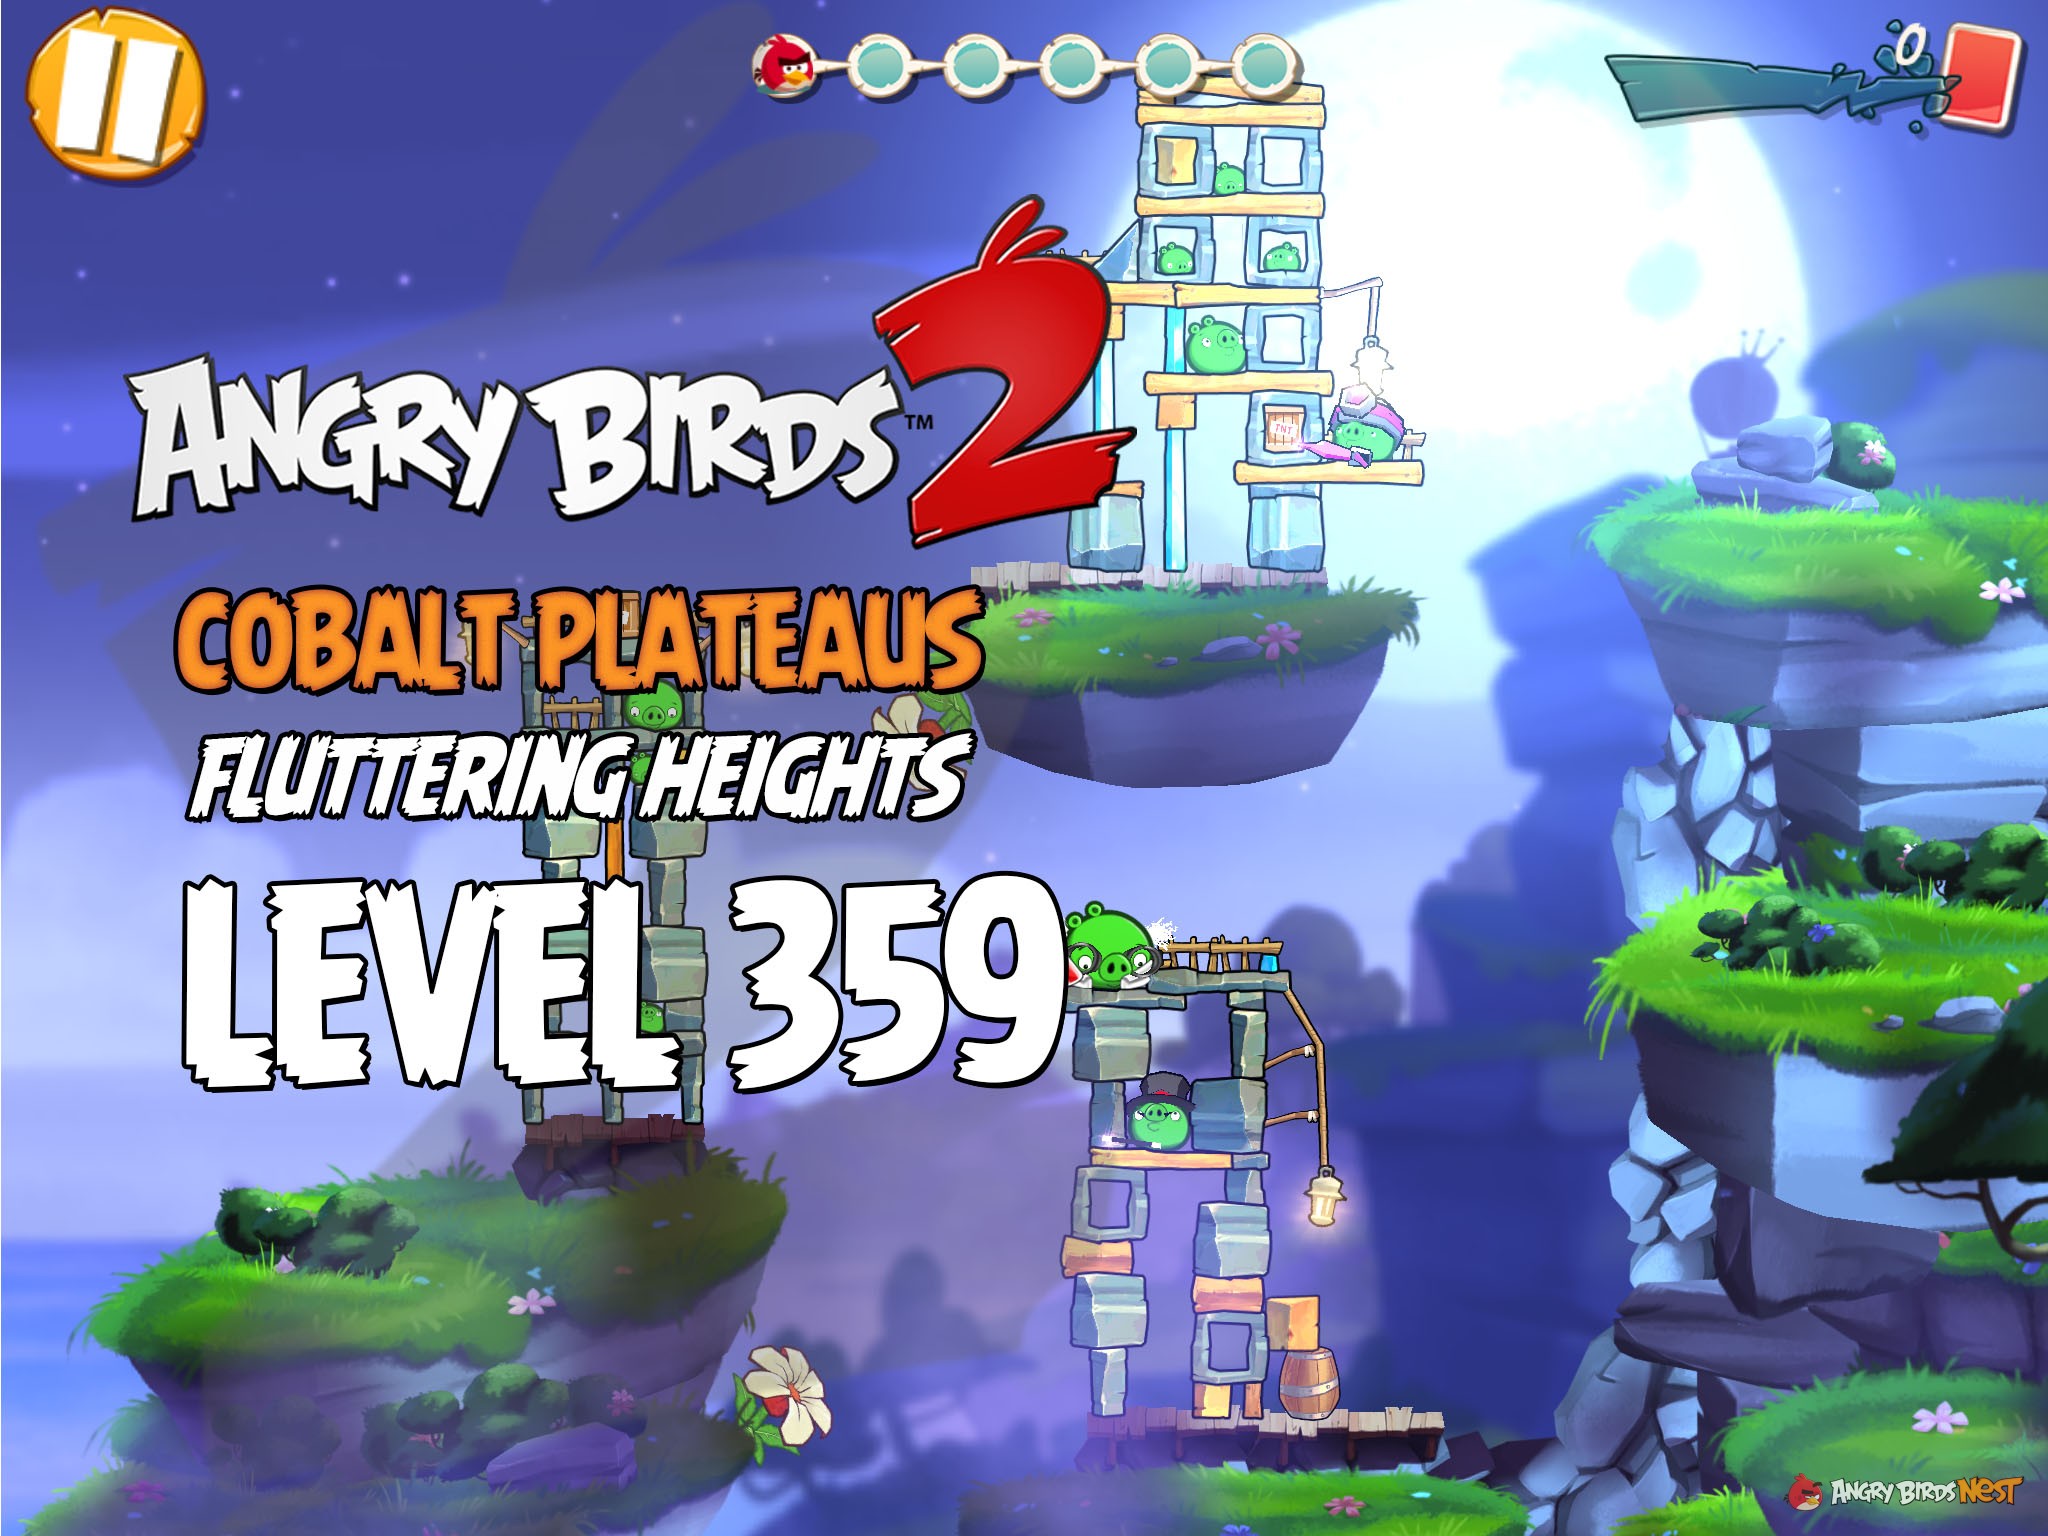 Angry Birds 2 Cobalt Plateaus Fluttering Heights Level 359